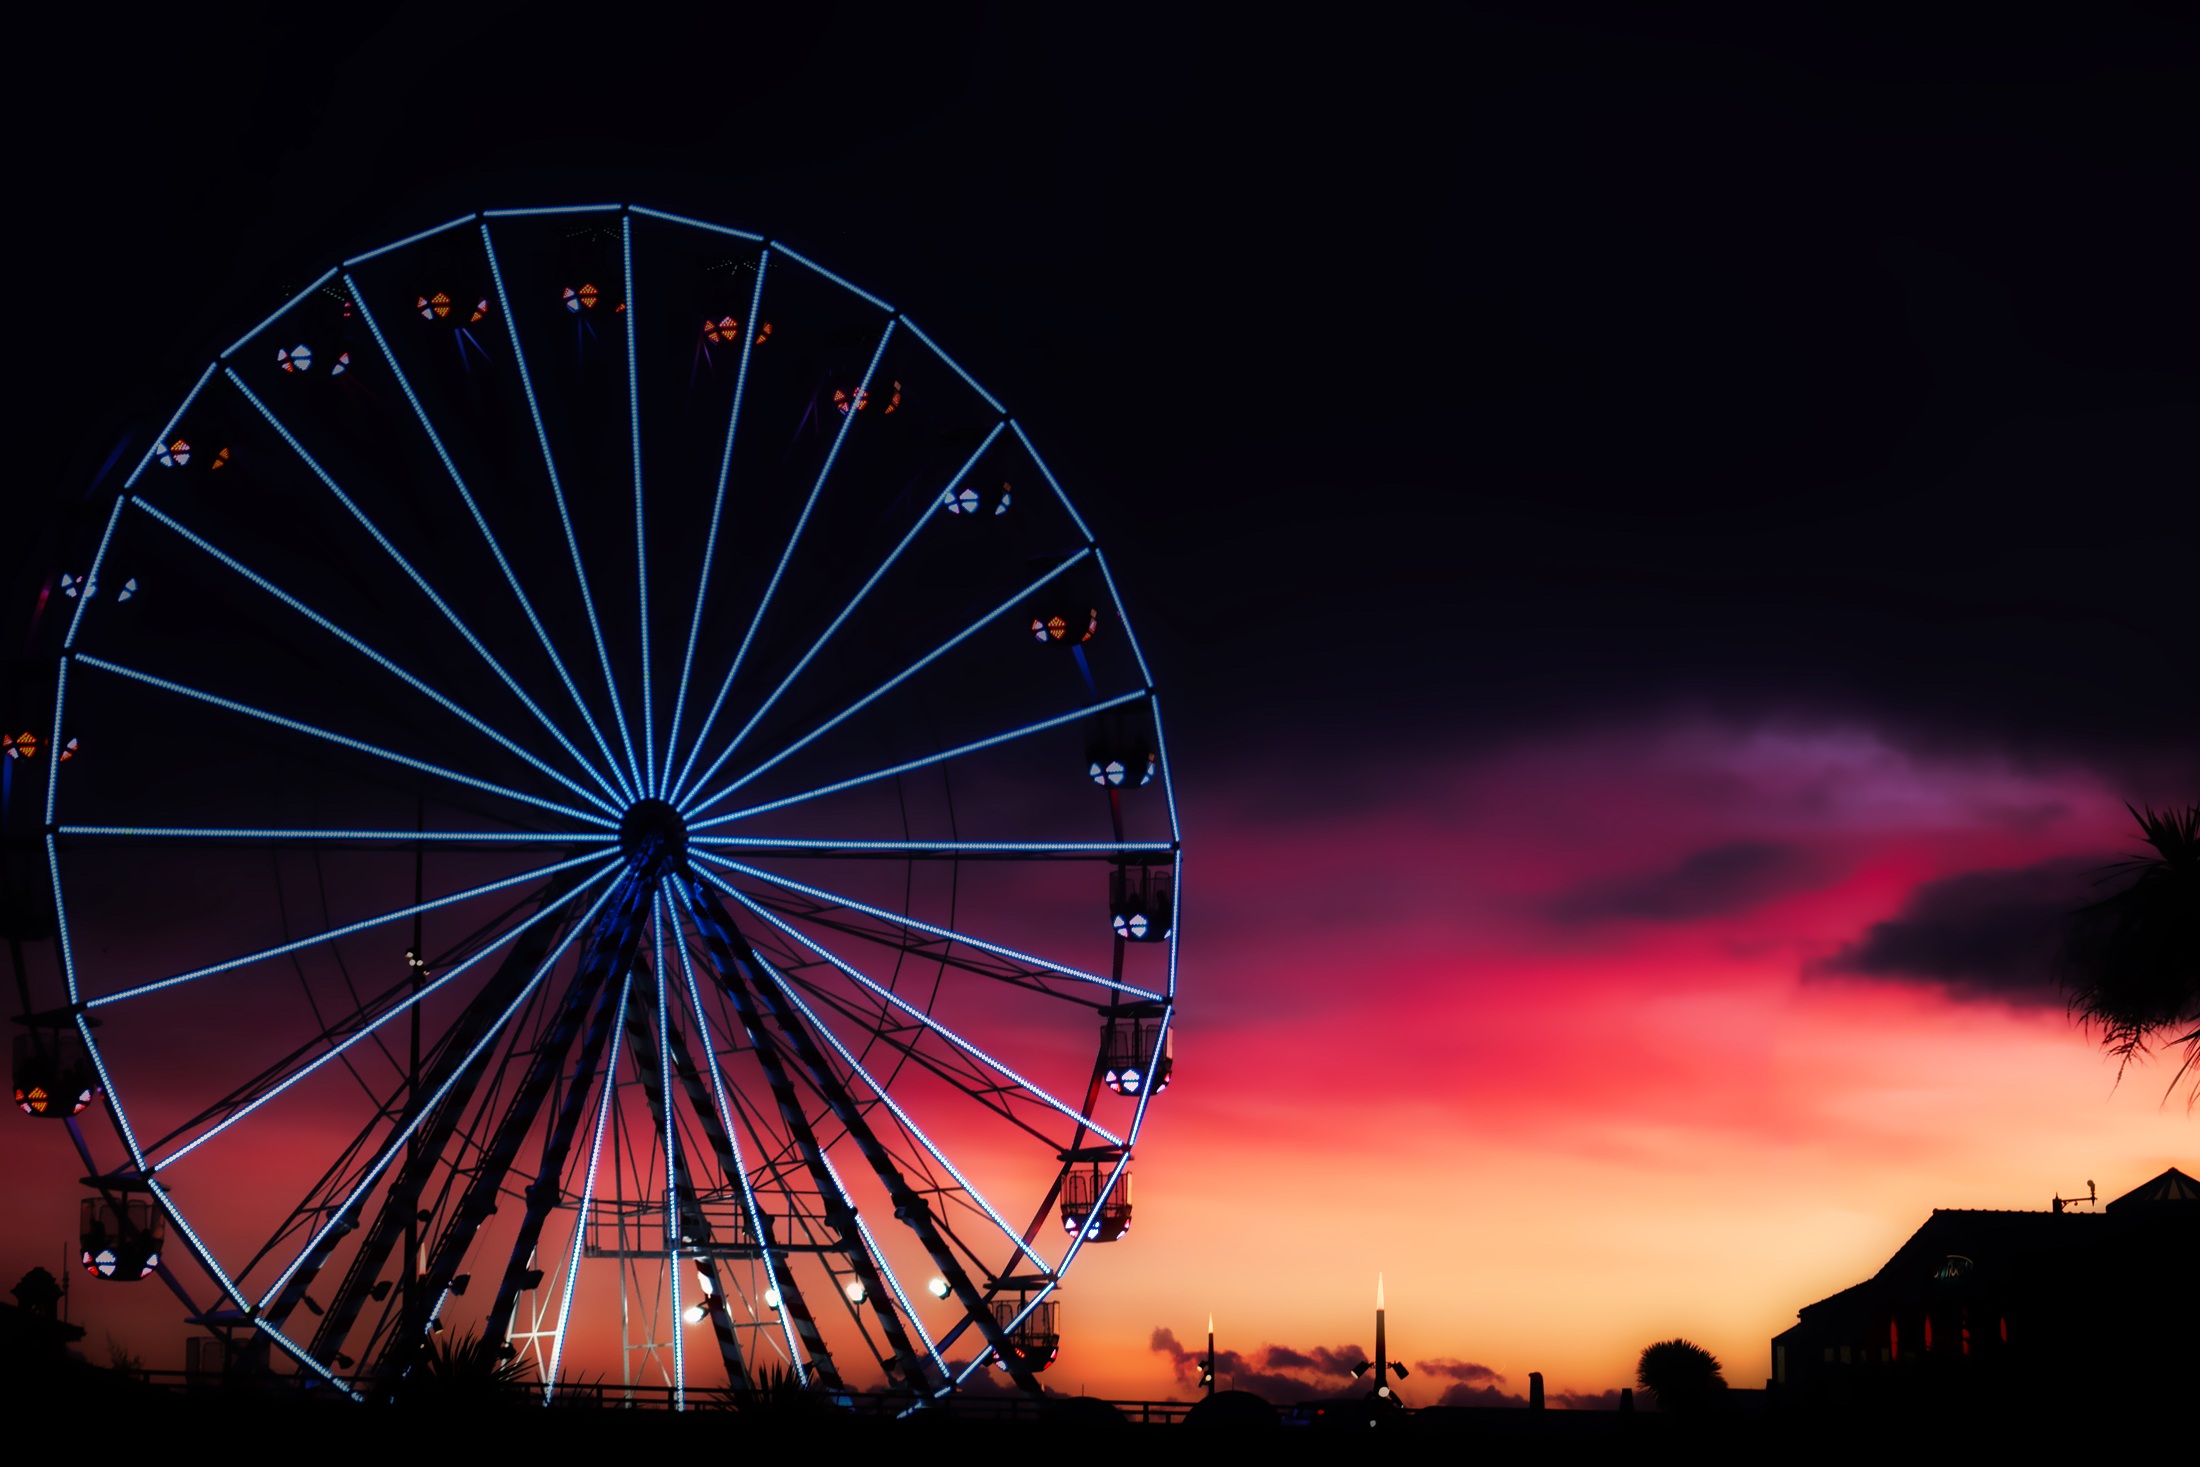 Wallpaper for mobile devices great britain, dark, england, ferris wheel